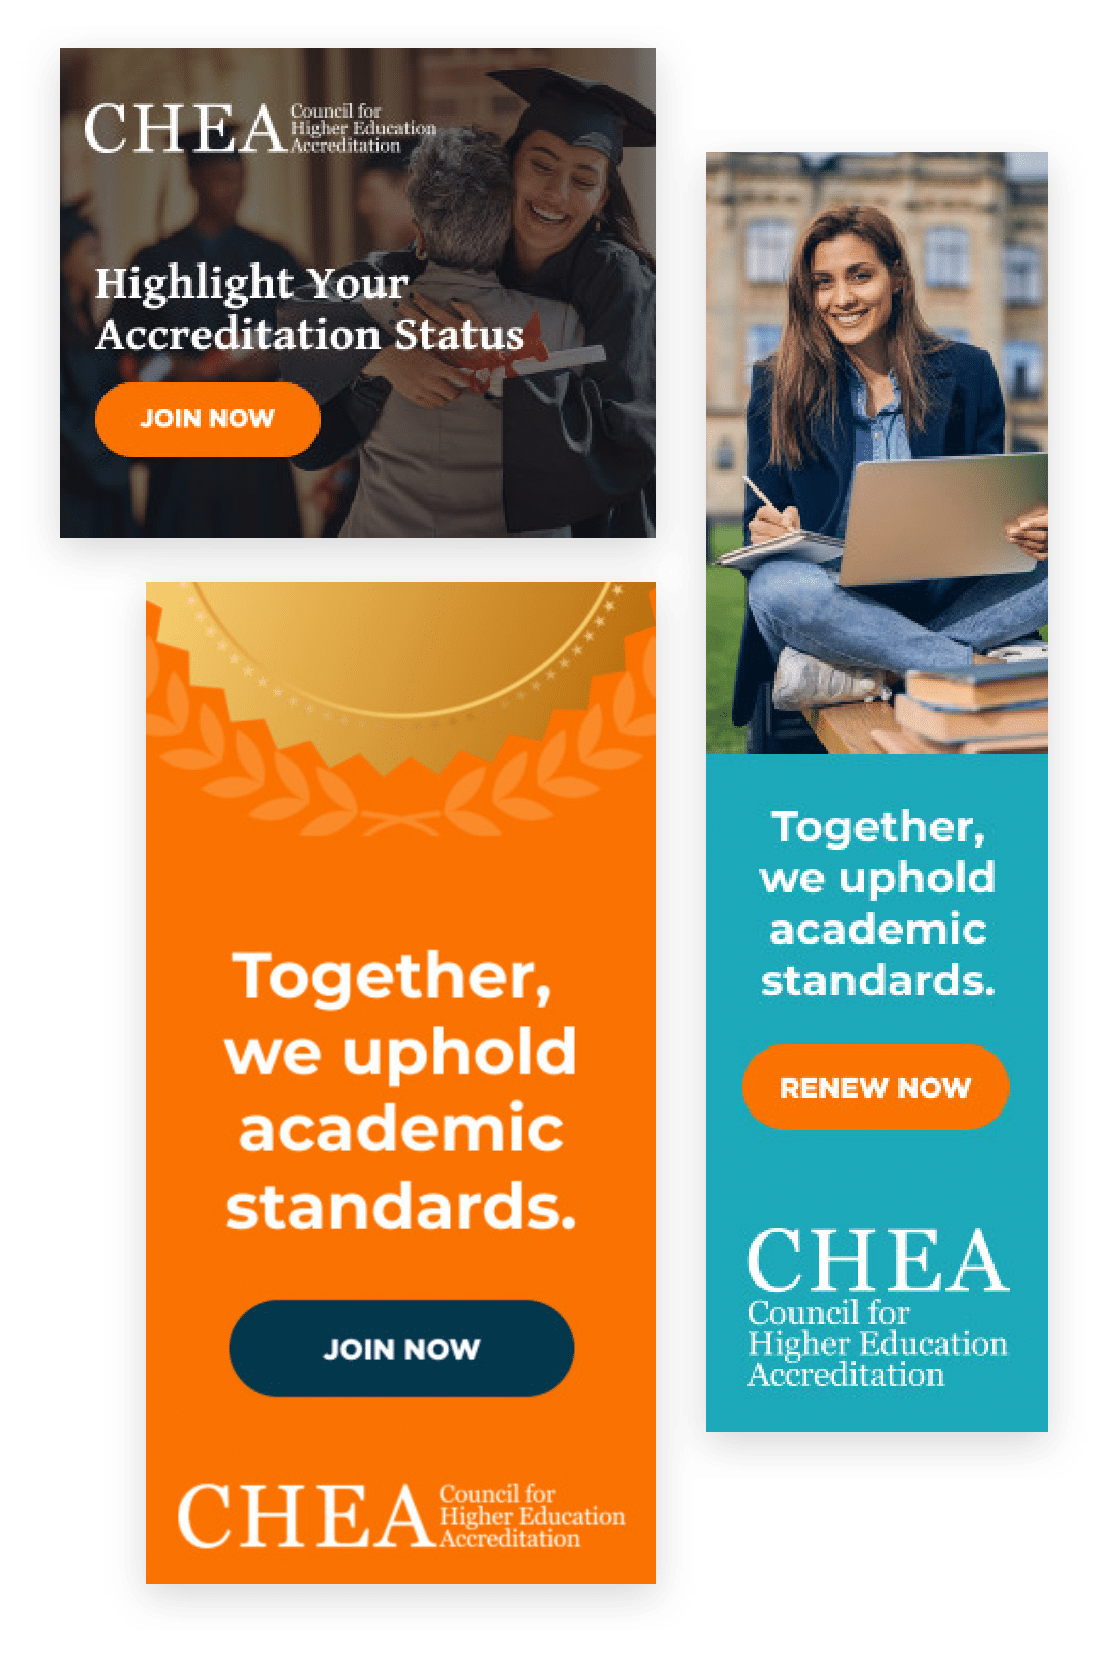 advertisement showcasing the benefits and accreditation services offered by the council for higher education accreditation (chea).